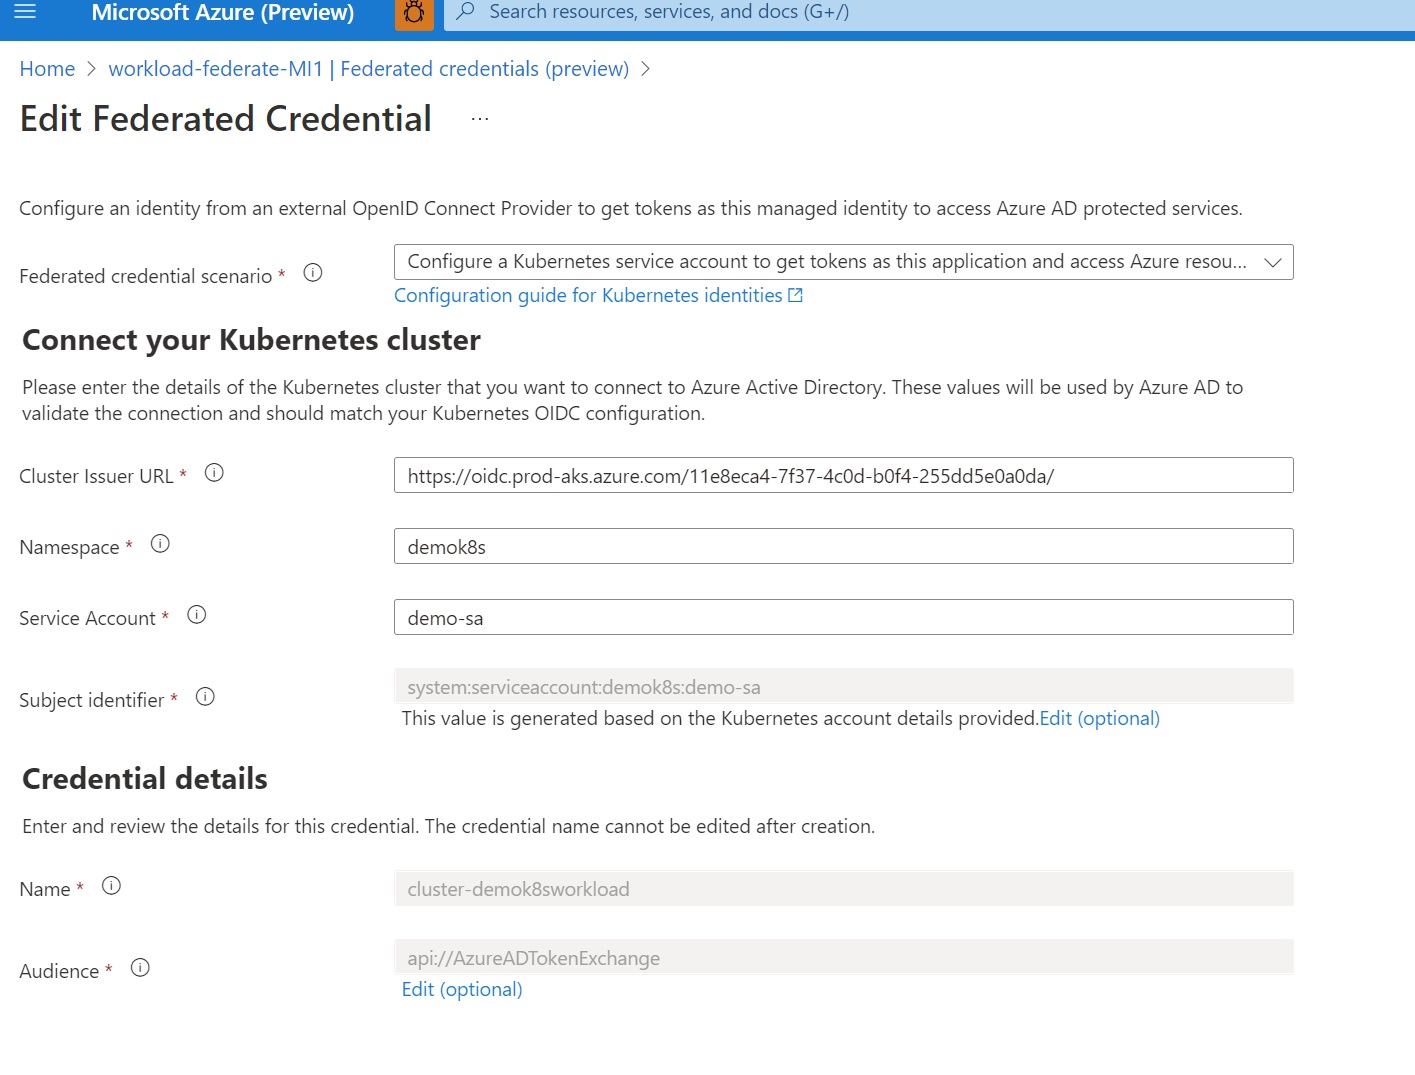 federated credential